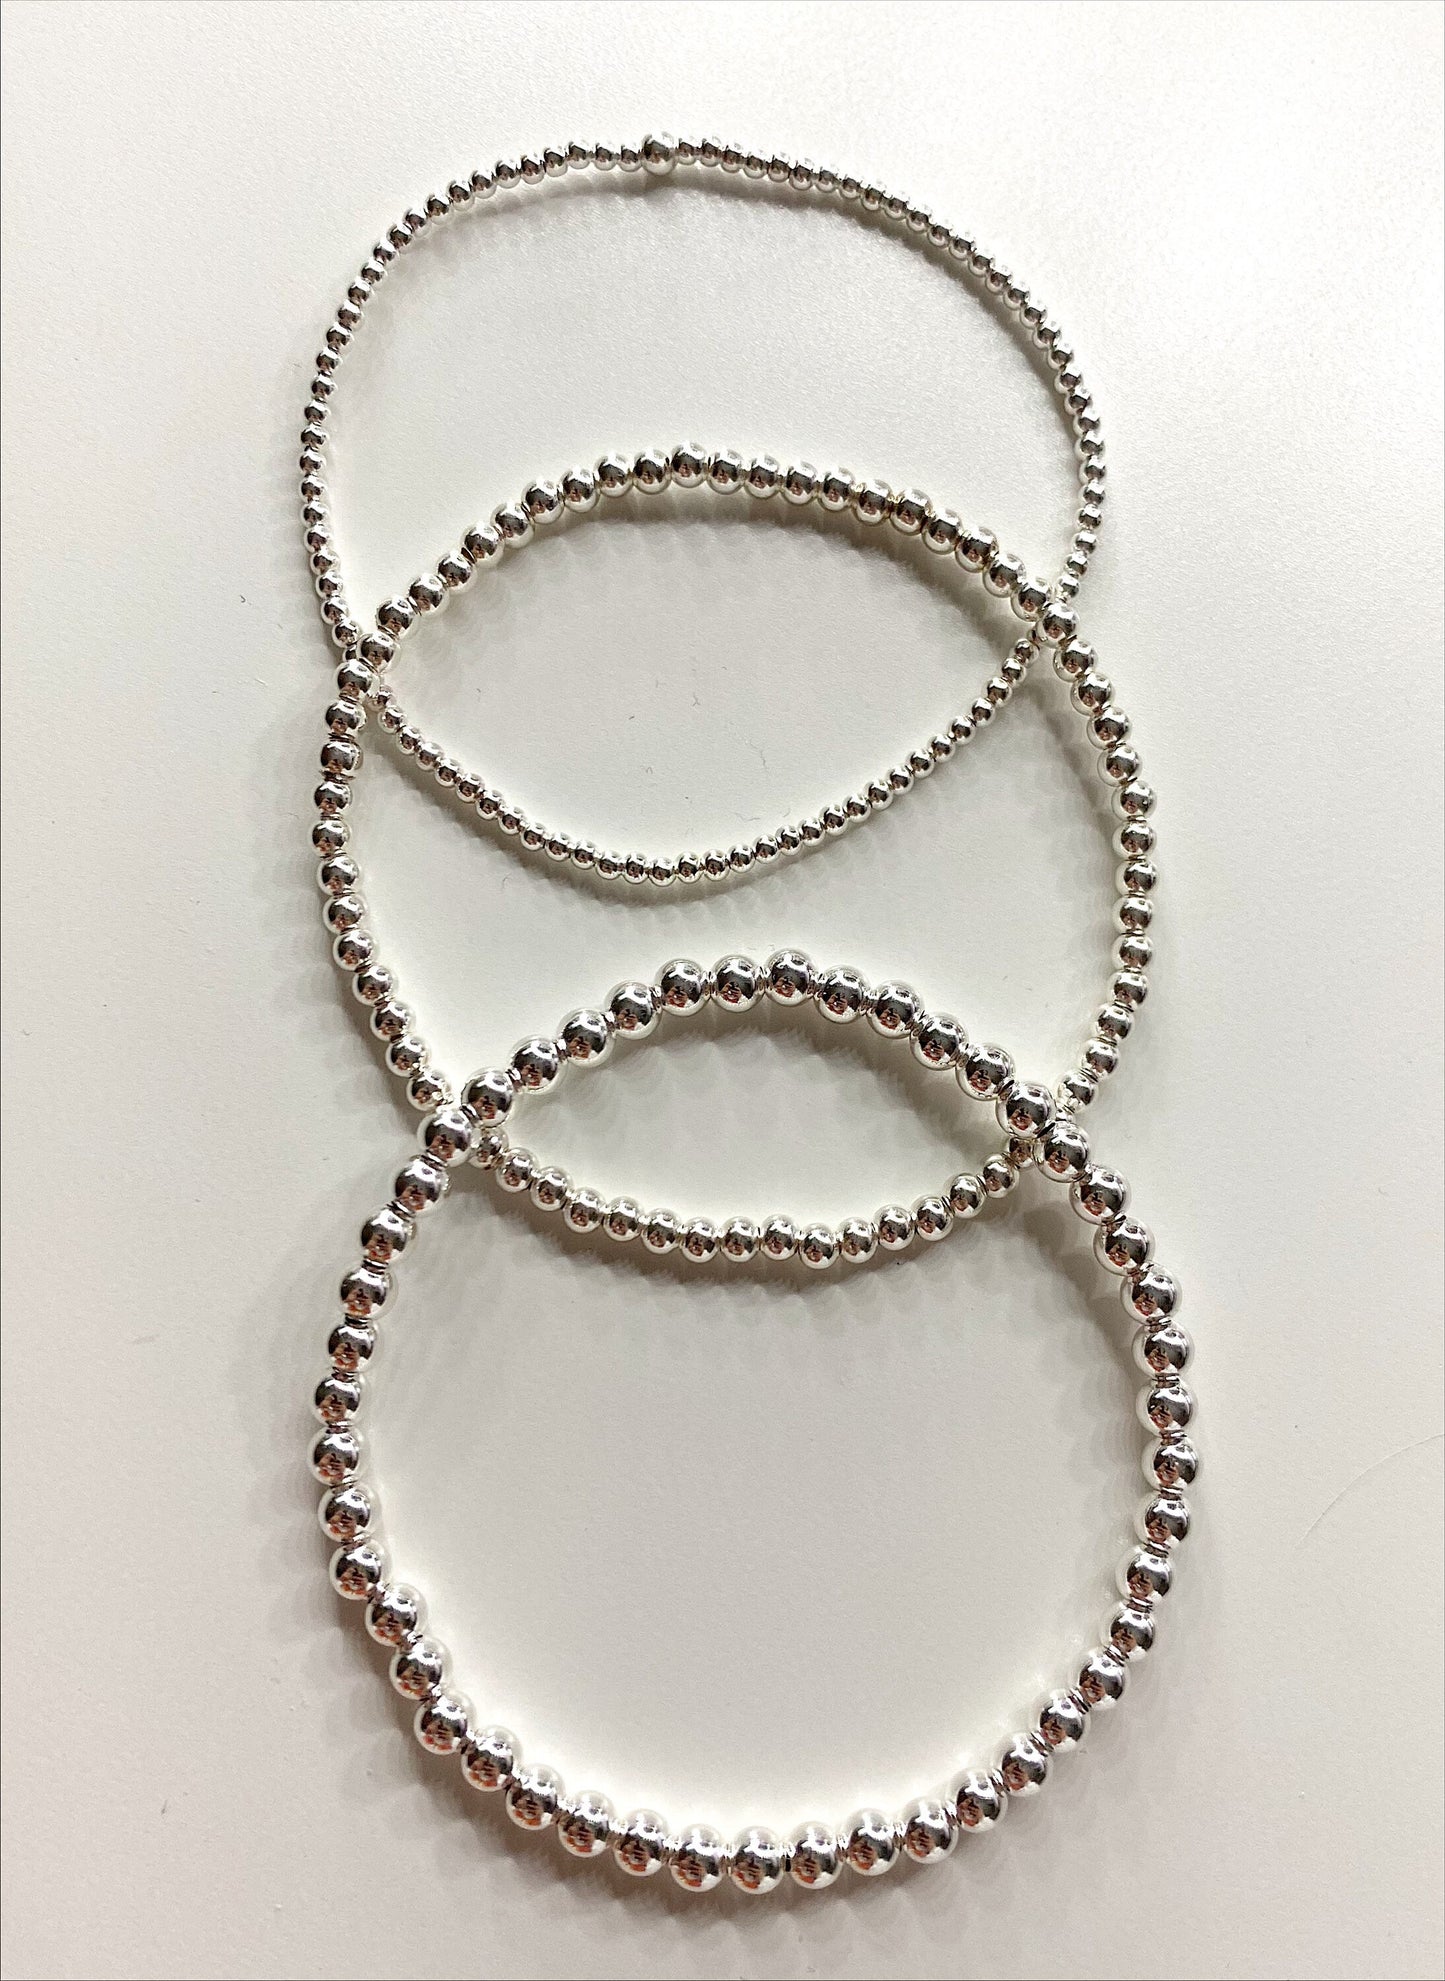 The Sterling Individual Bracelet